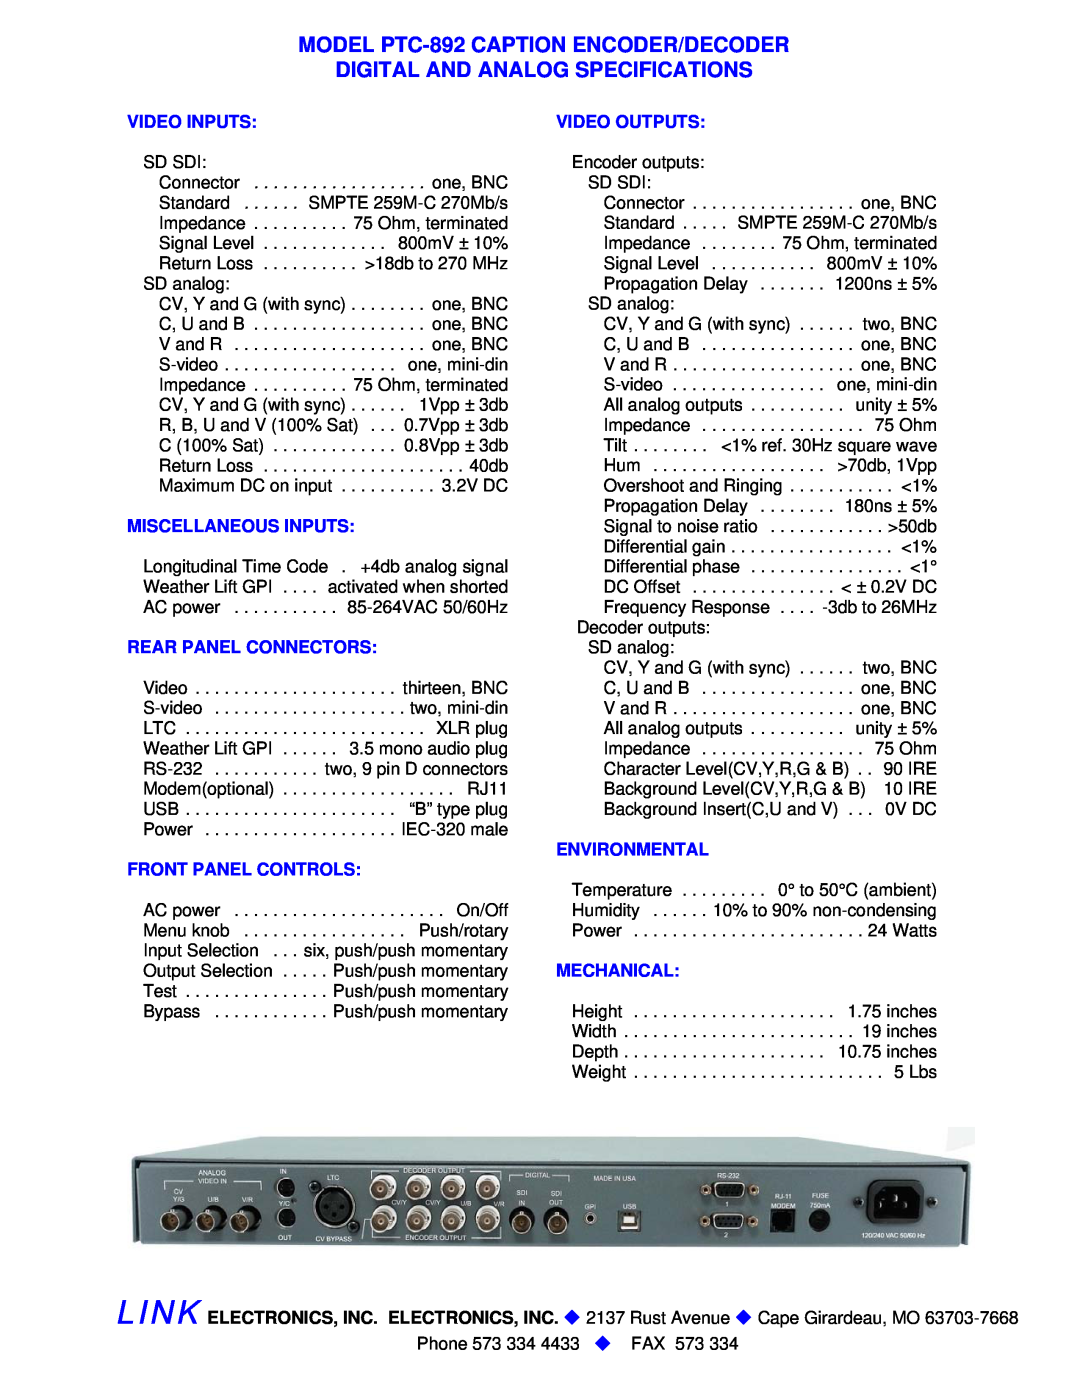 Link electronic MODEL PTC-892 CAPTION ENCODER/DECODER, Digital And Analog Specifications, Video Inputs, Video Outputs 